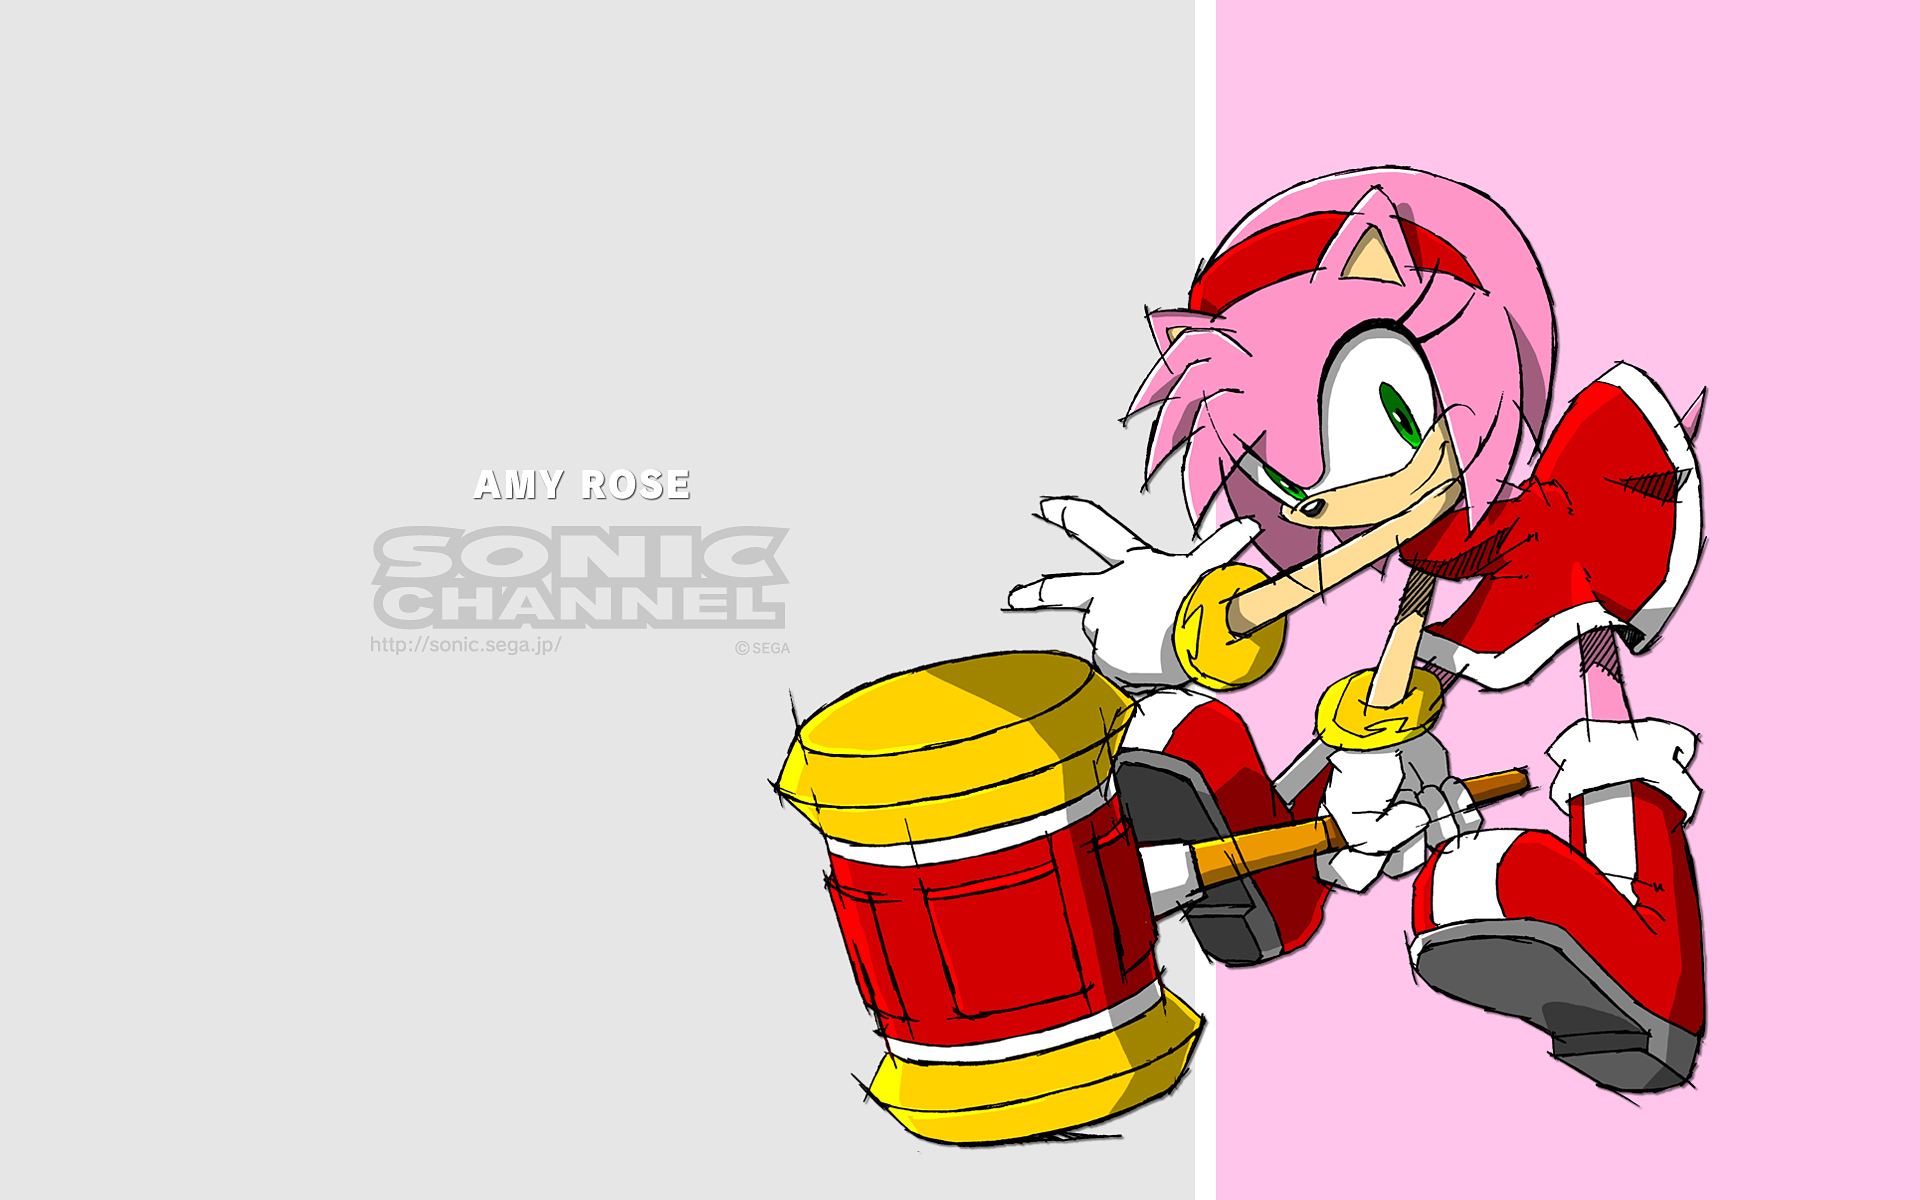 Wallpapers Sonic Channel Last Minute Continue